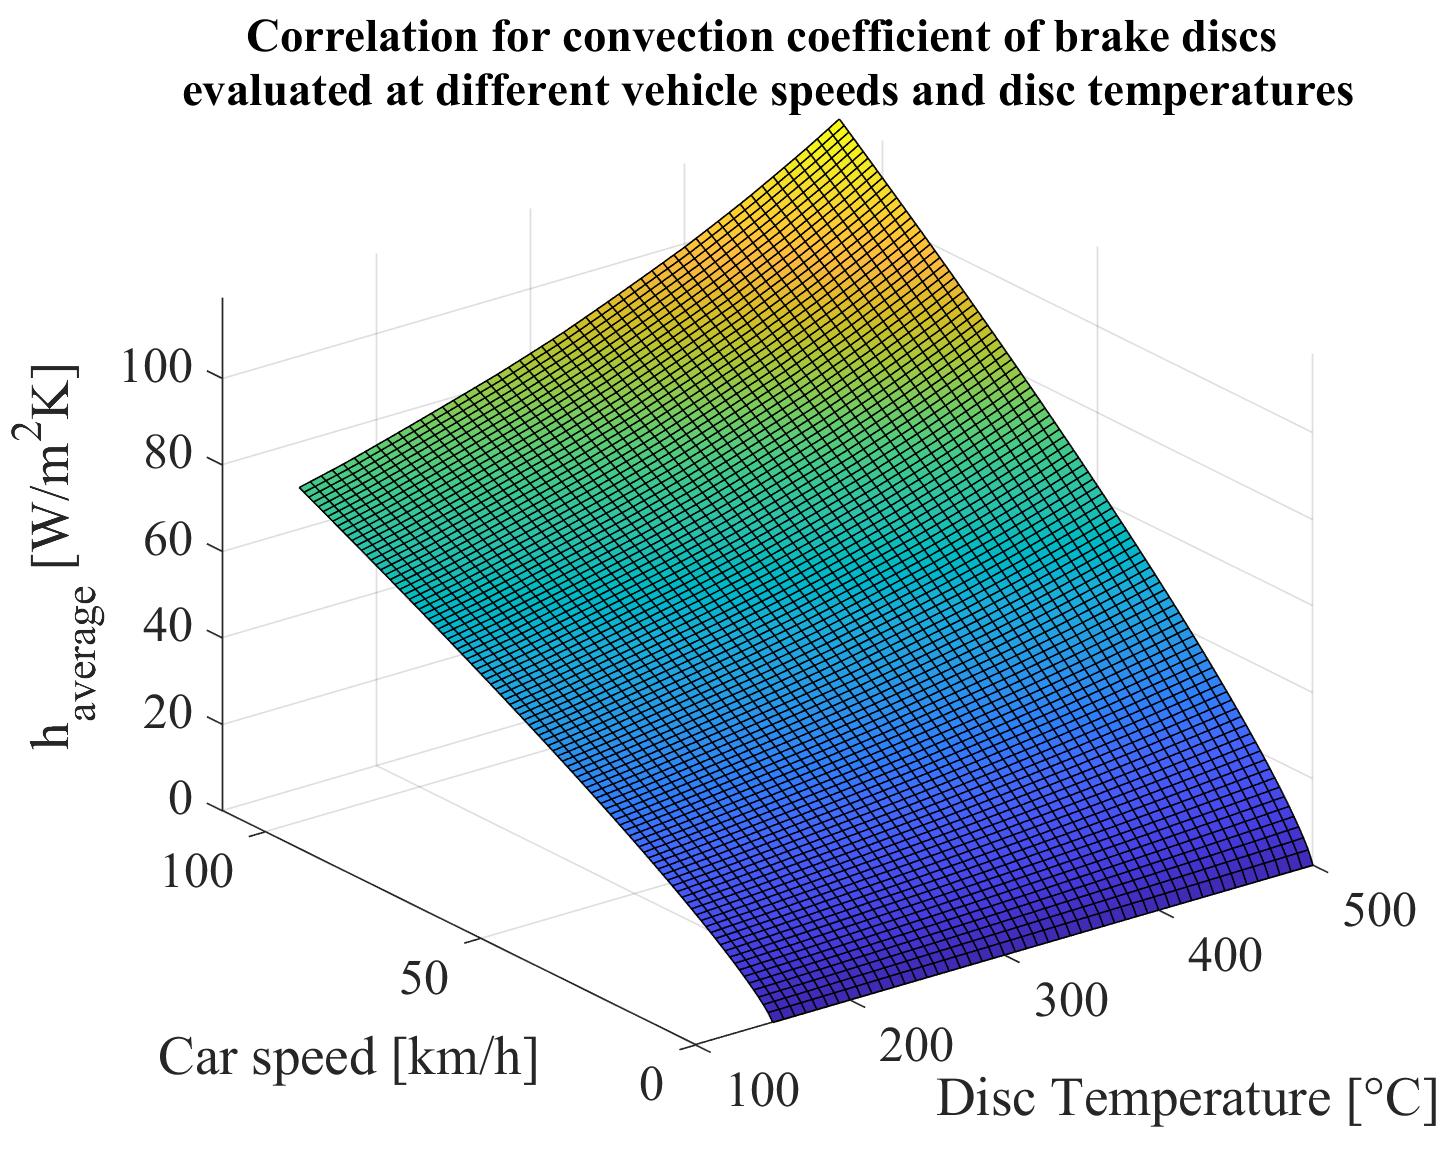 Computing the convection coefficient of a brake disc